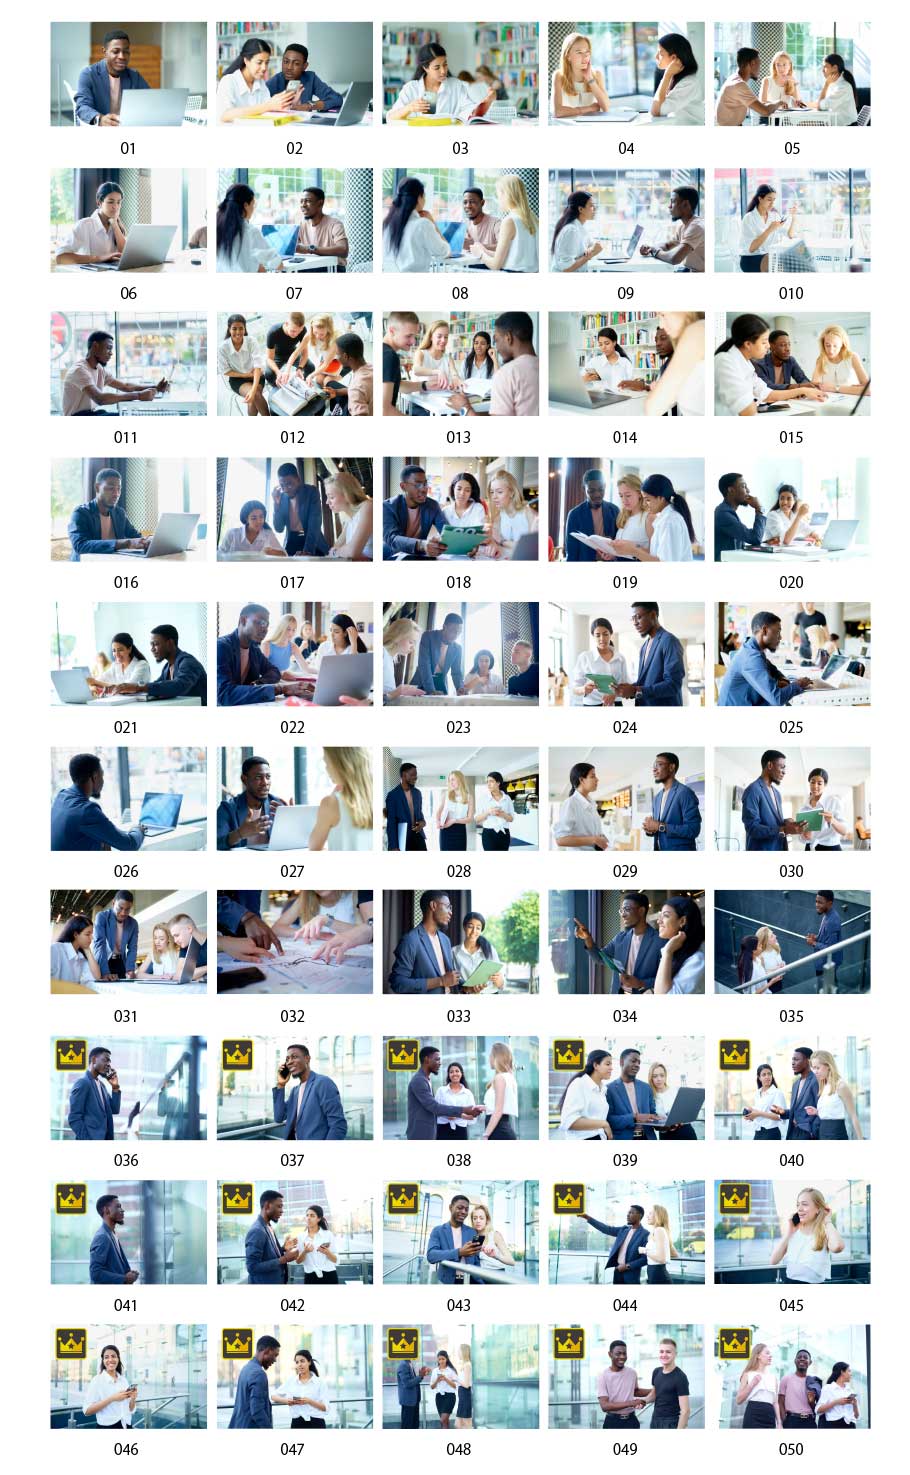 Global business images